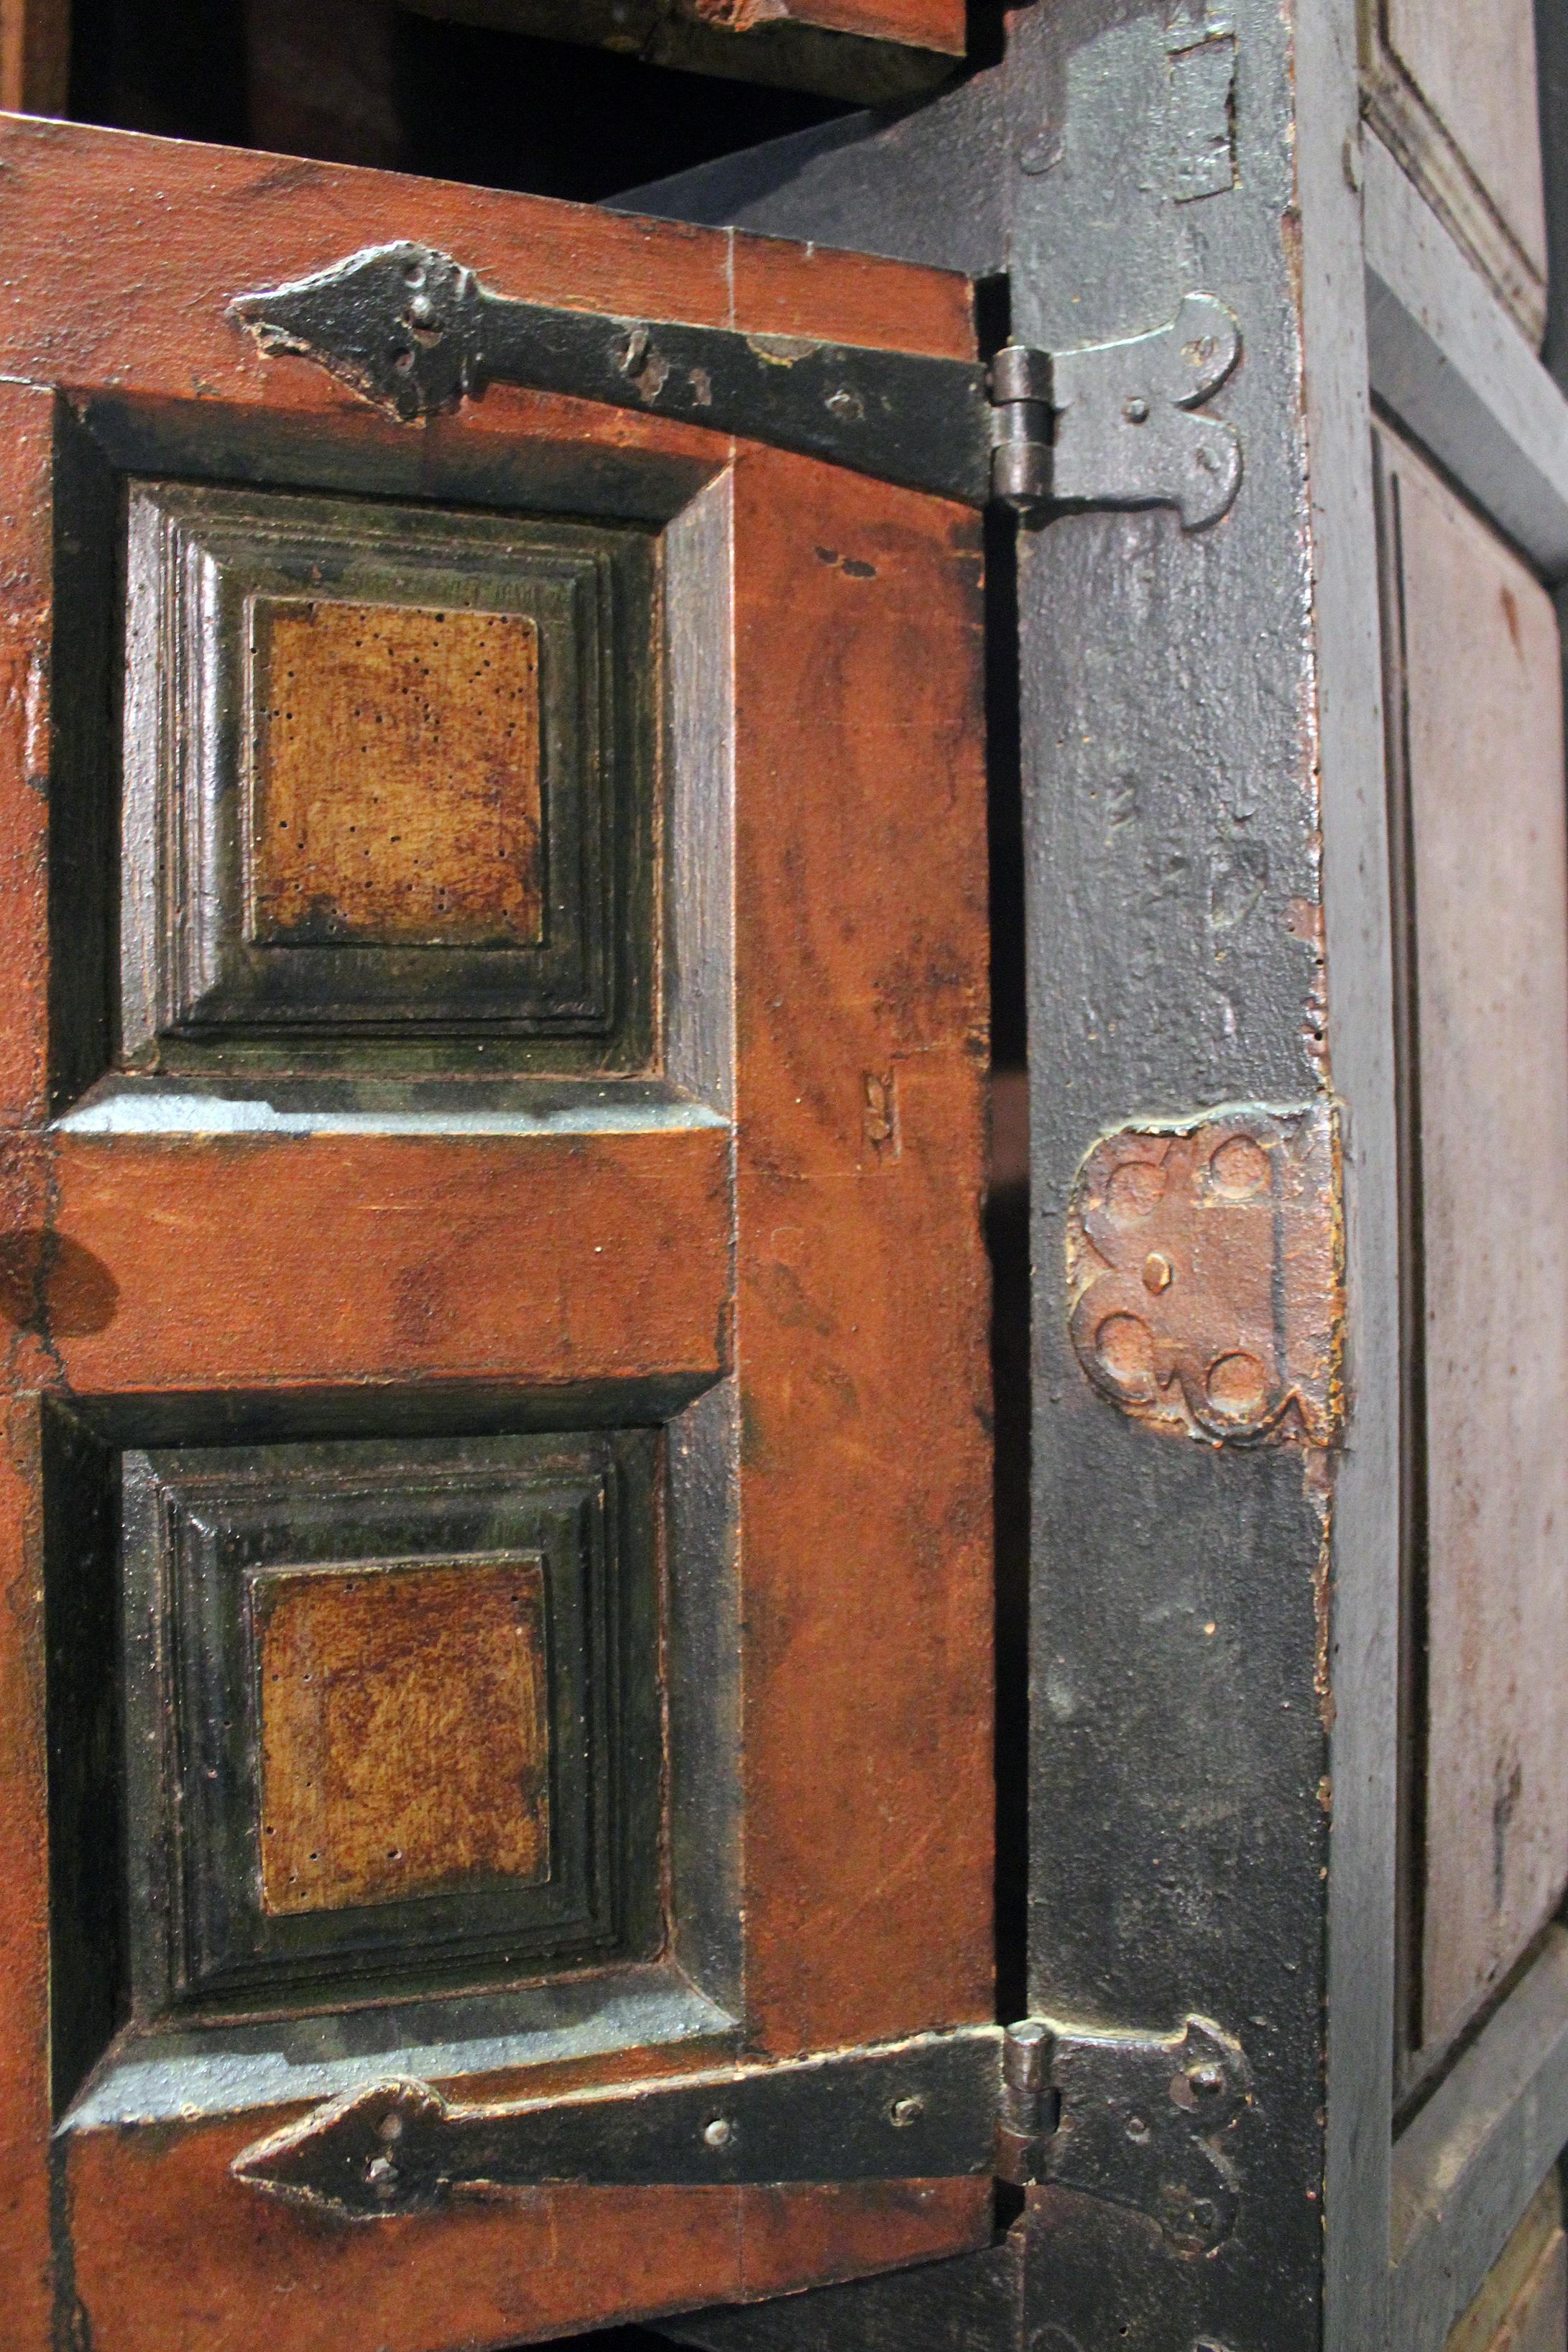 17th Century Spanish Painted Cabinet with Original Doors, Locks and Fittings 6